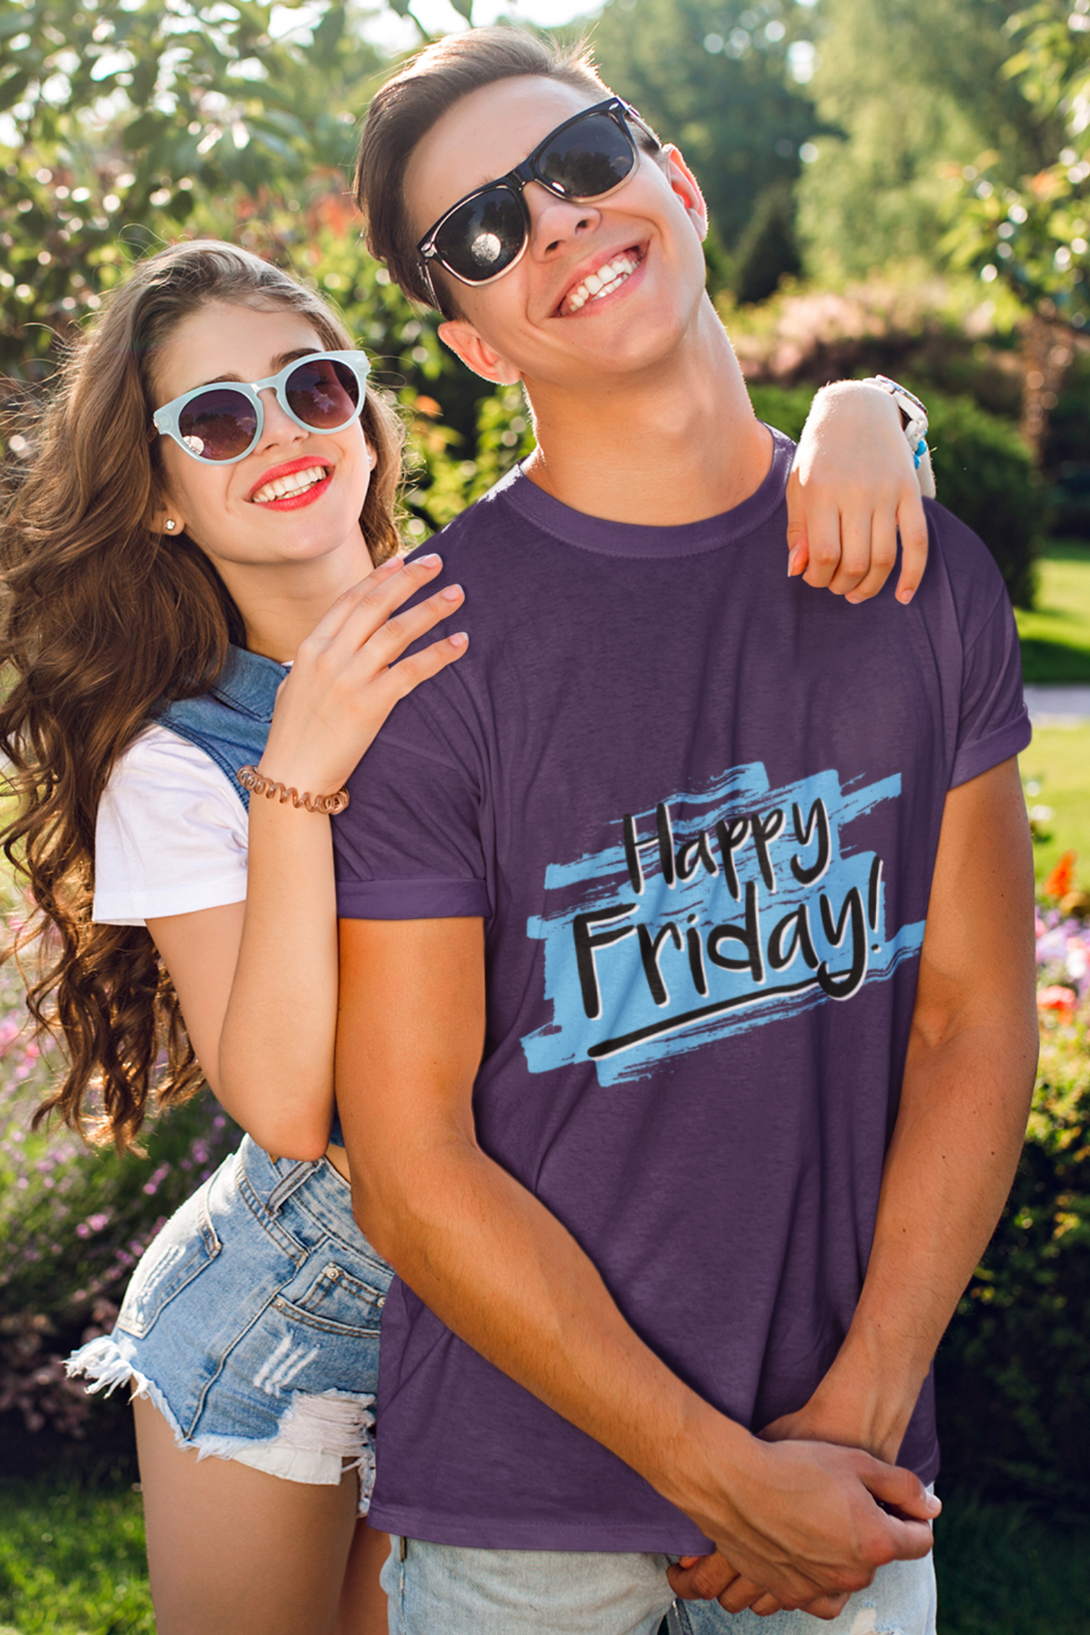 Happy Friday Printed T-Shirt For Men - WowWaves - 8